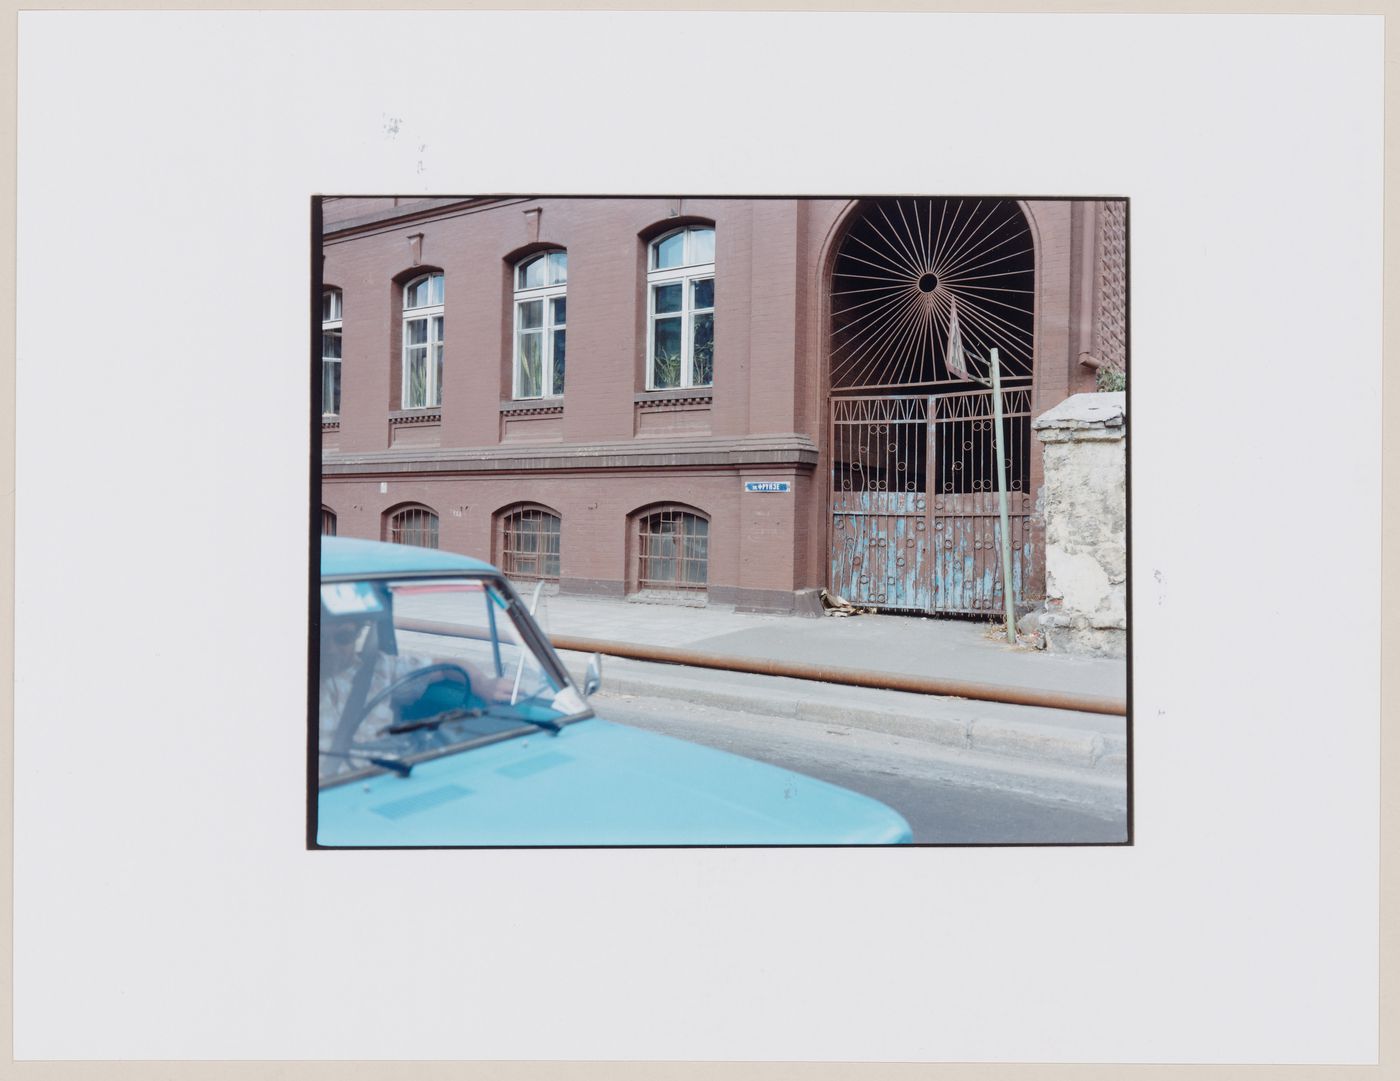 View of a building showing a gateway, a street, and an automobile, Kaliningrad, Kaliningradskaia oblast', Russia (from the series "In between cities")